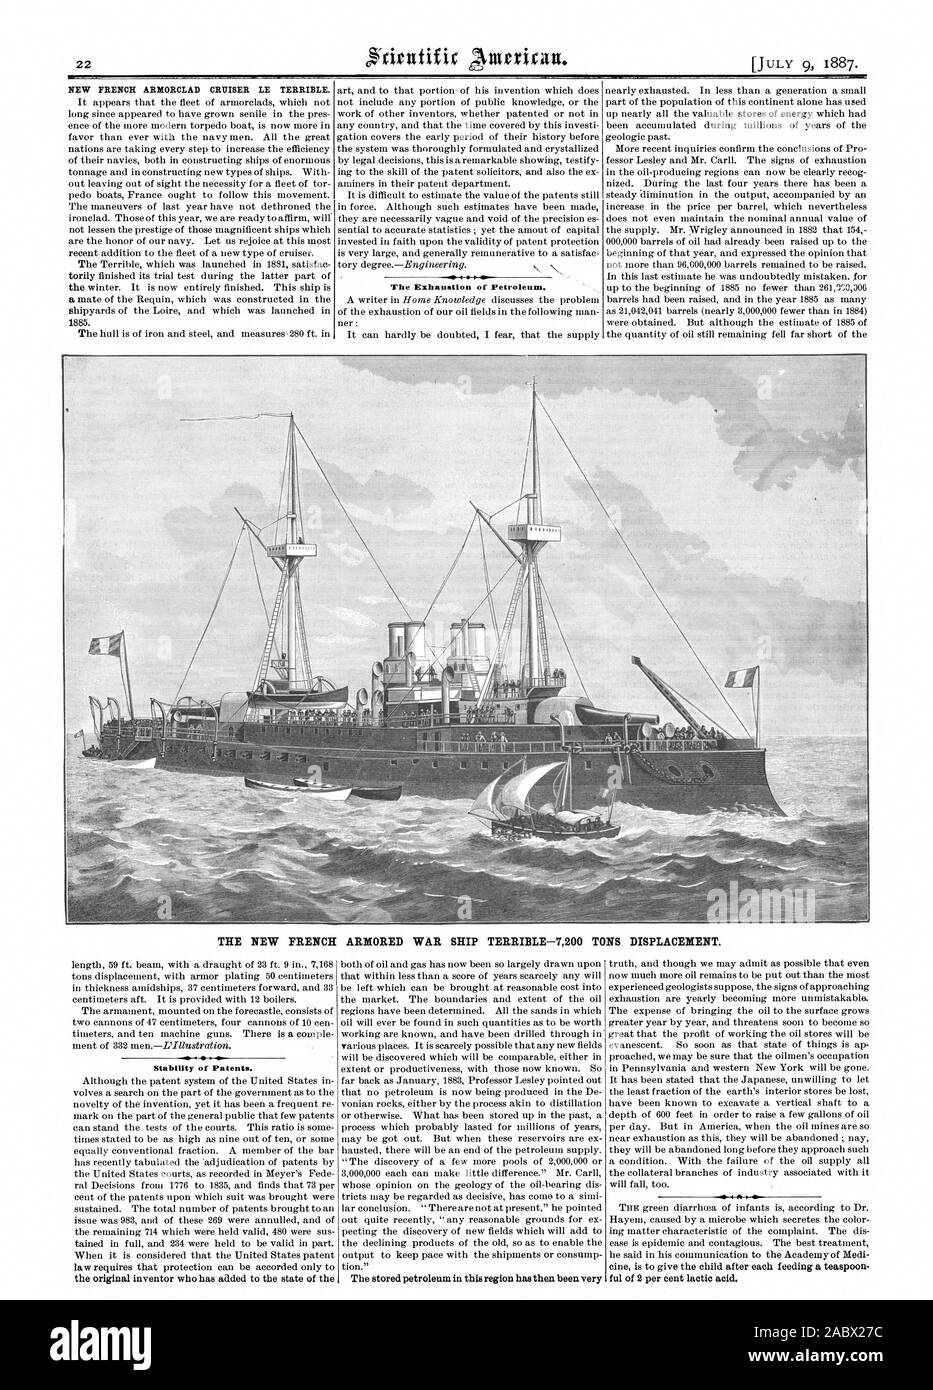 NEW FRENCH ARNORCLAD CRUISER LE TERRIBLE. The Exhaustion of Petroleum. THE NEW FRENCH ARMORED WAR SHIP TERRIBLE-7200 TONS DISPLACEMENT. Stability of Patents., scientific american, 1887-07-09 Stock Photo